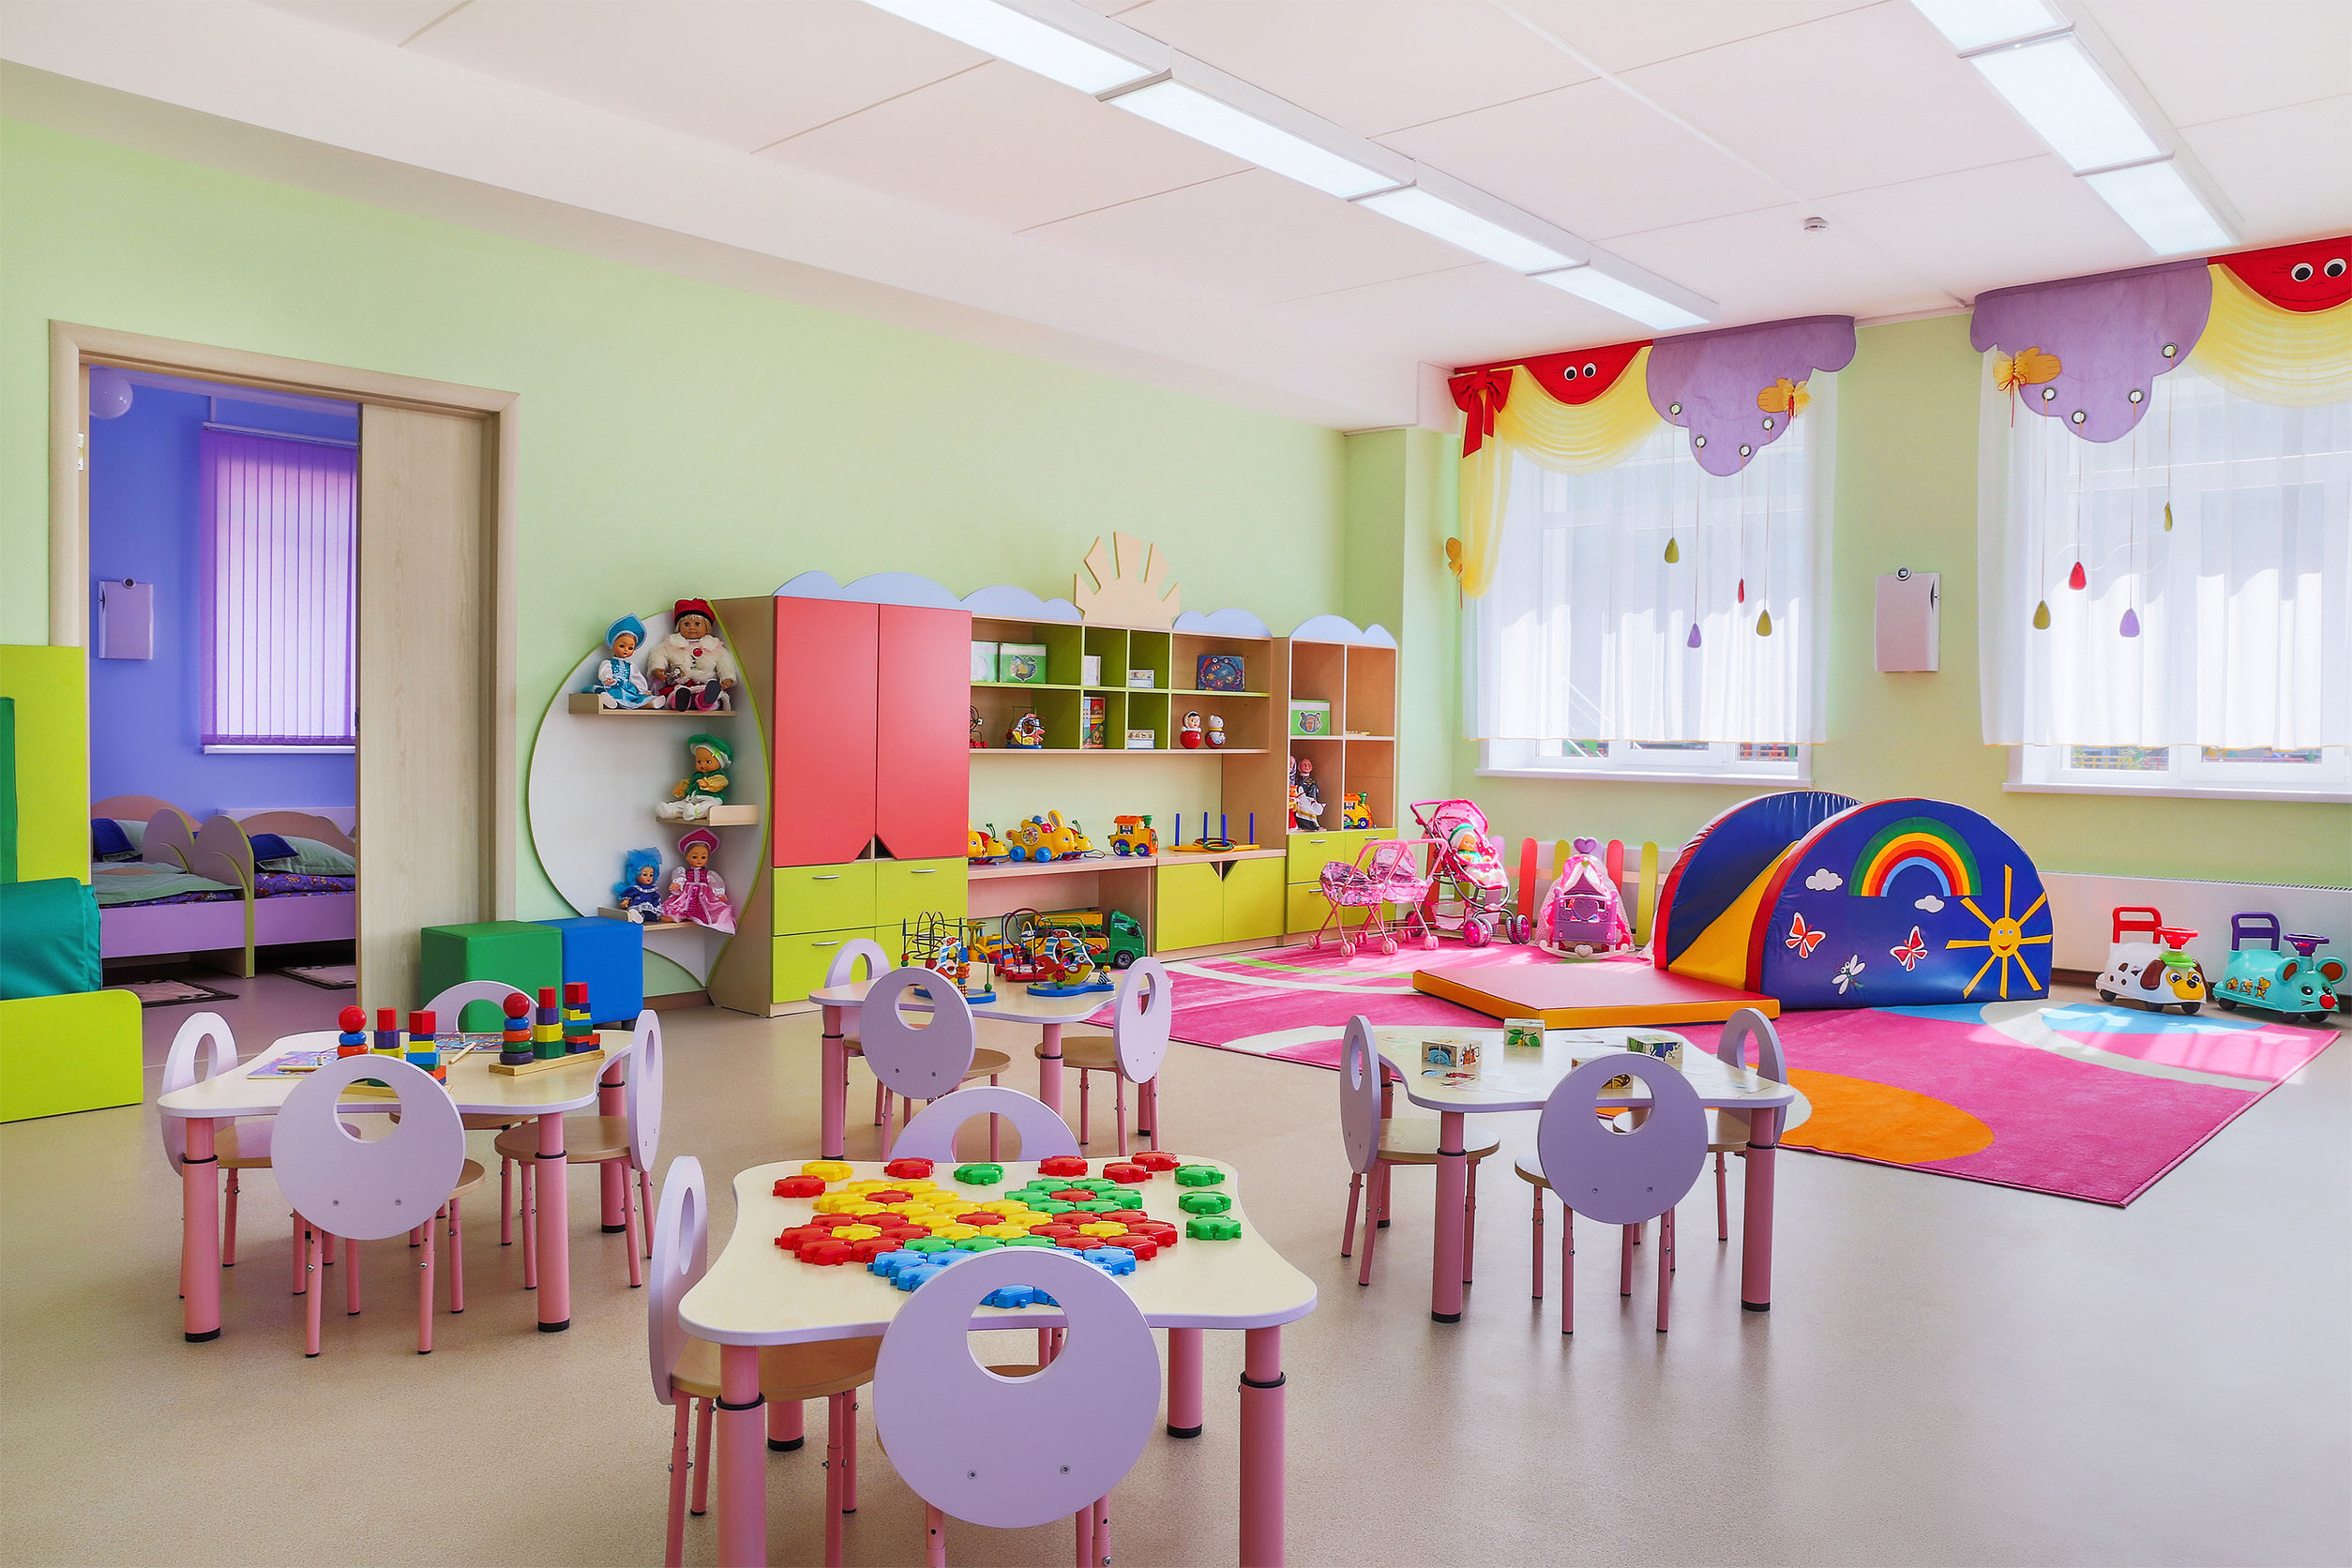 flexible-classroom-design-student-centered-learning-environments